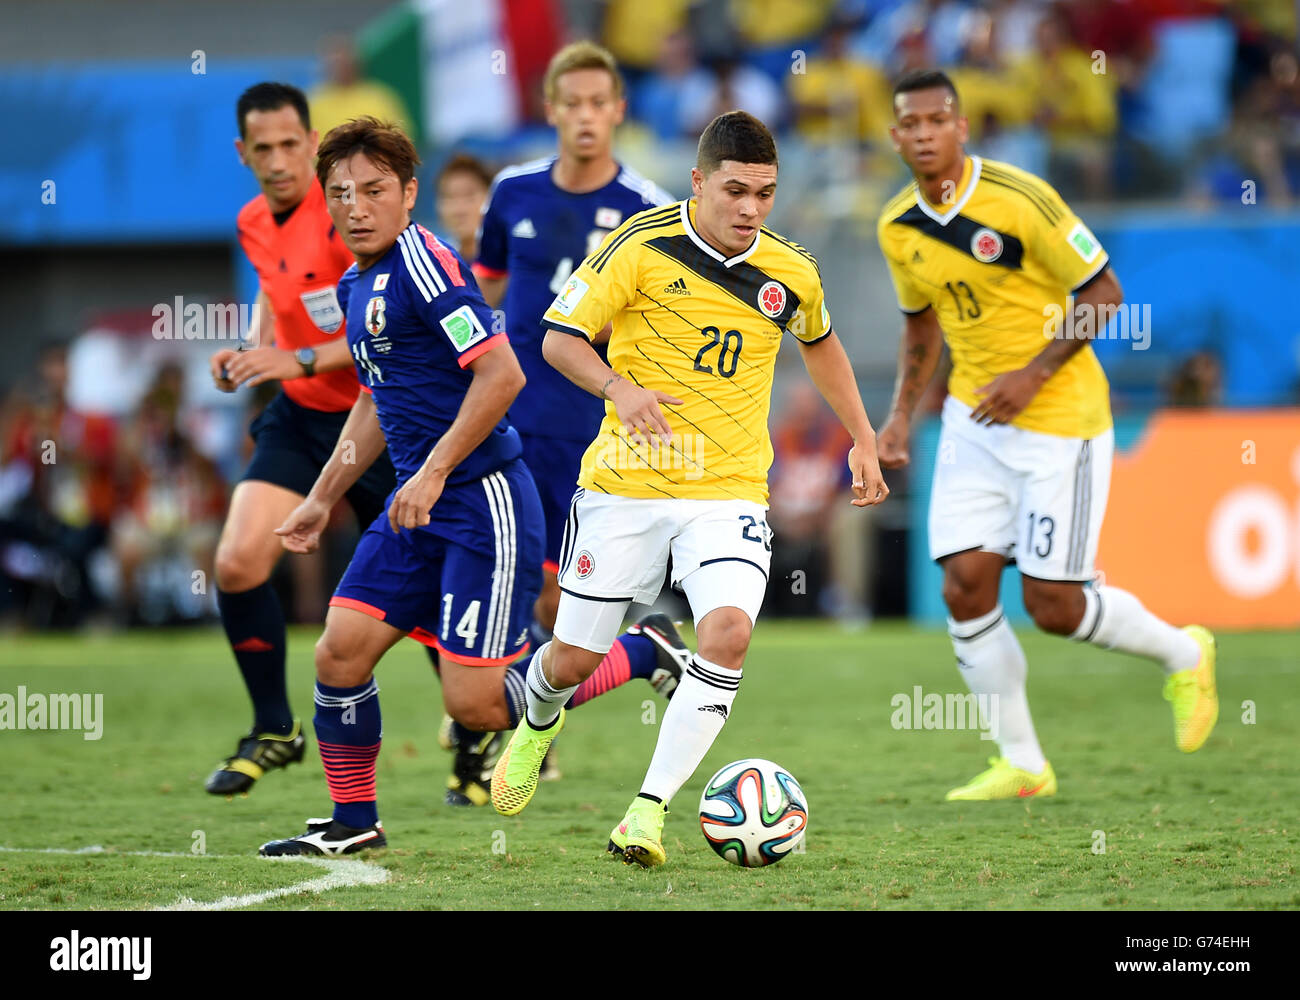 Soccer - FIFA World Cup 2014 - Group C - Japan v Colombia - Arena Pantanal. Japan's Toshihiro Aoyama battles for the ball with Colombia's Juan Quinero Stock Photo